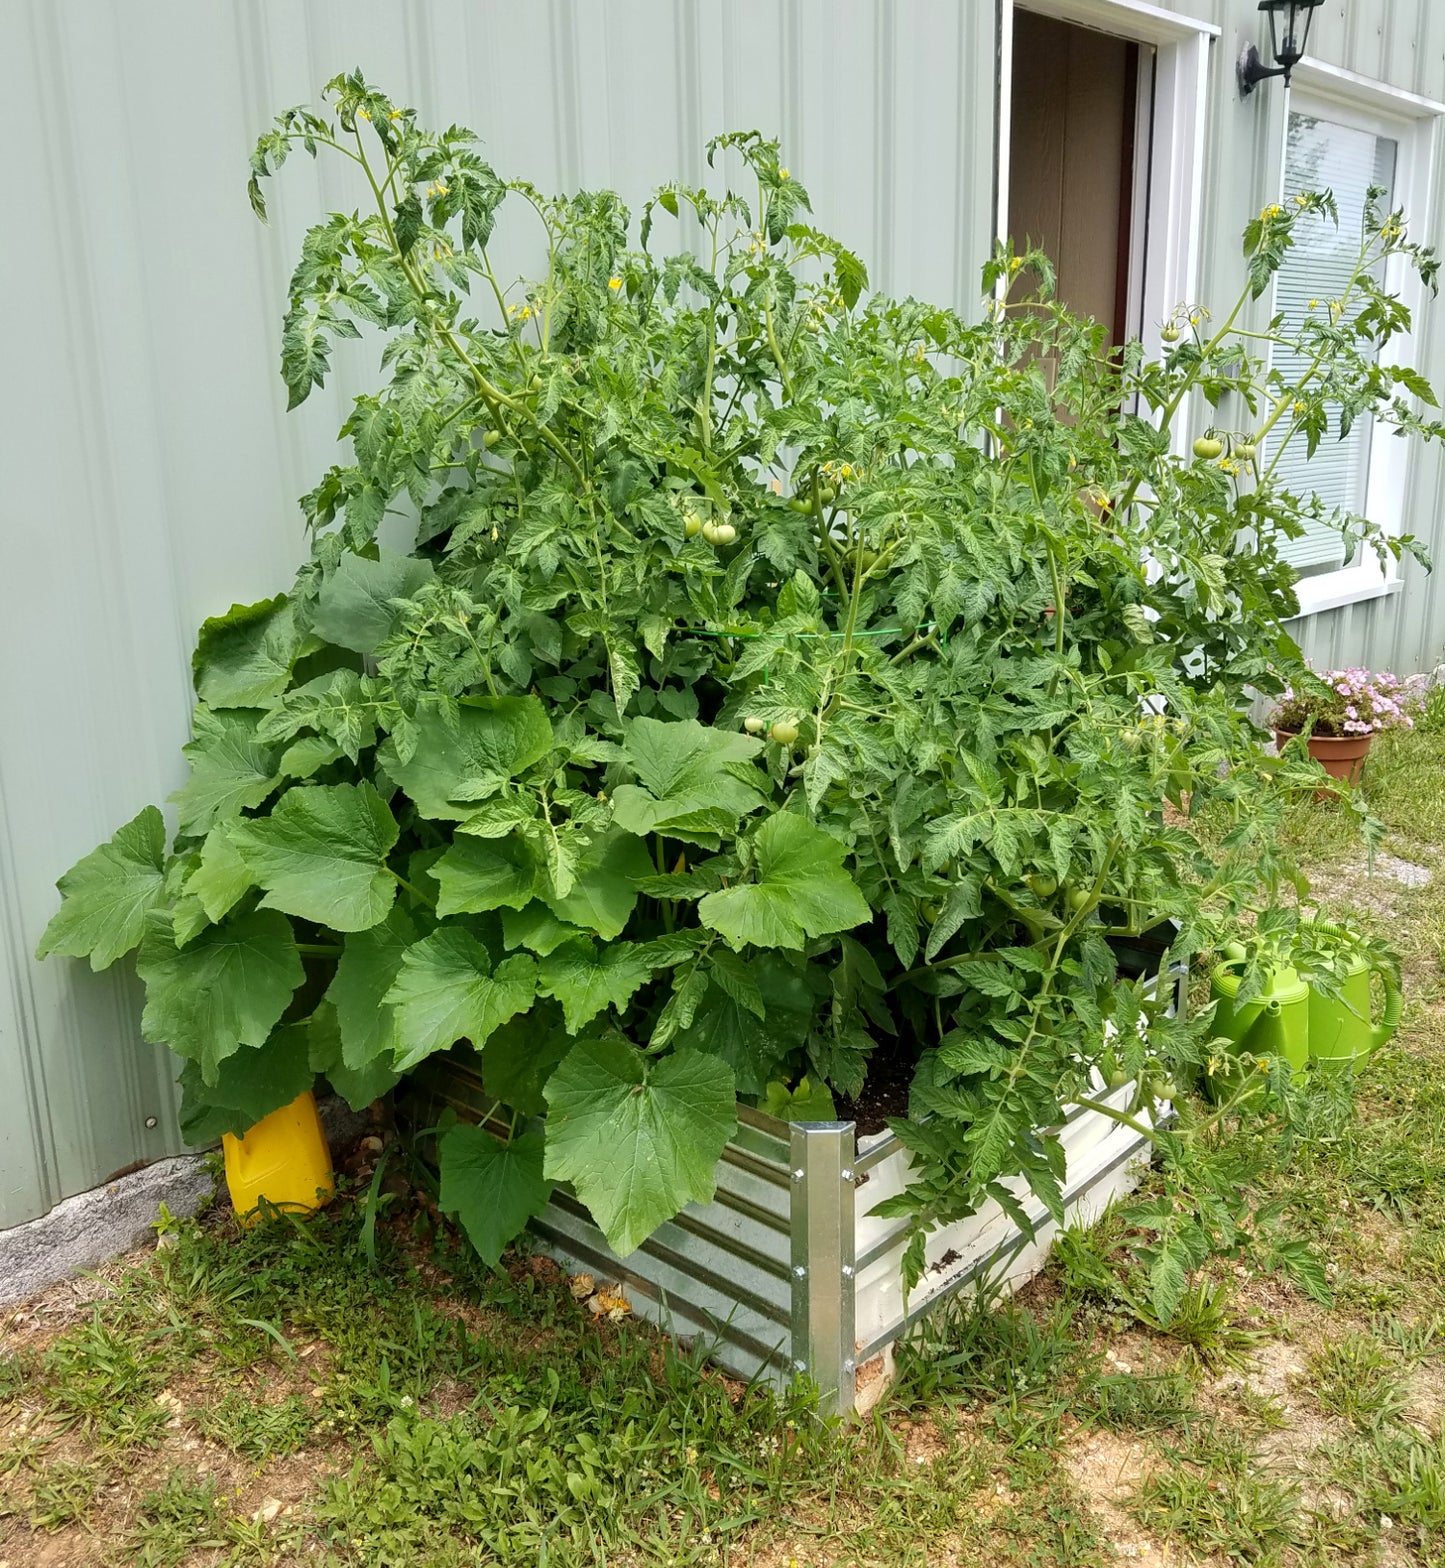 cuadra garden bed with tomatoes and squash